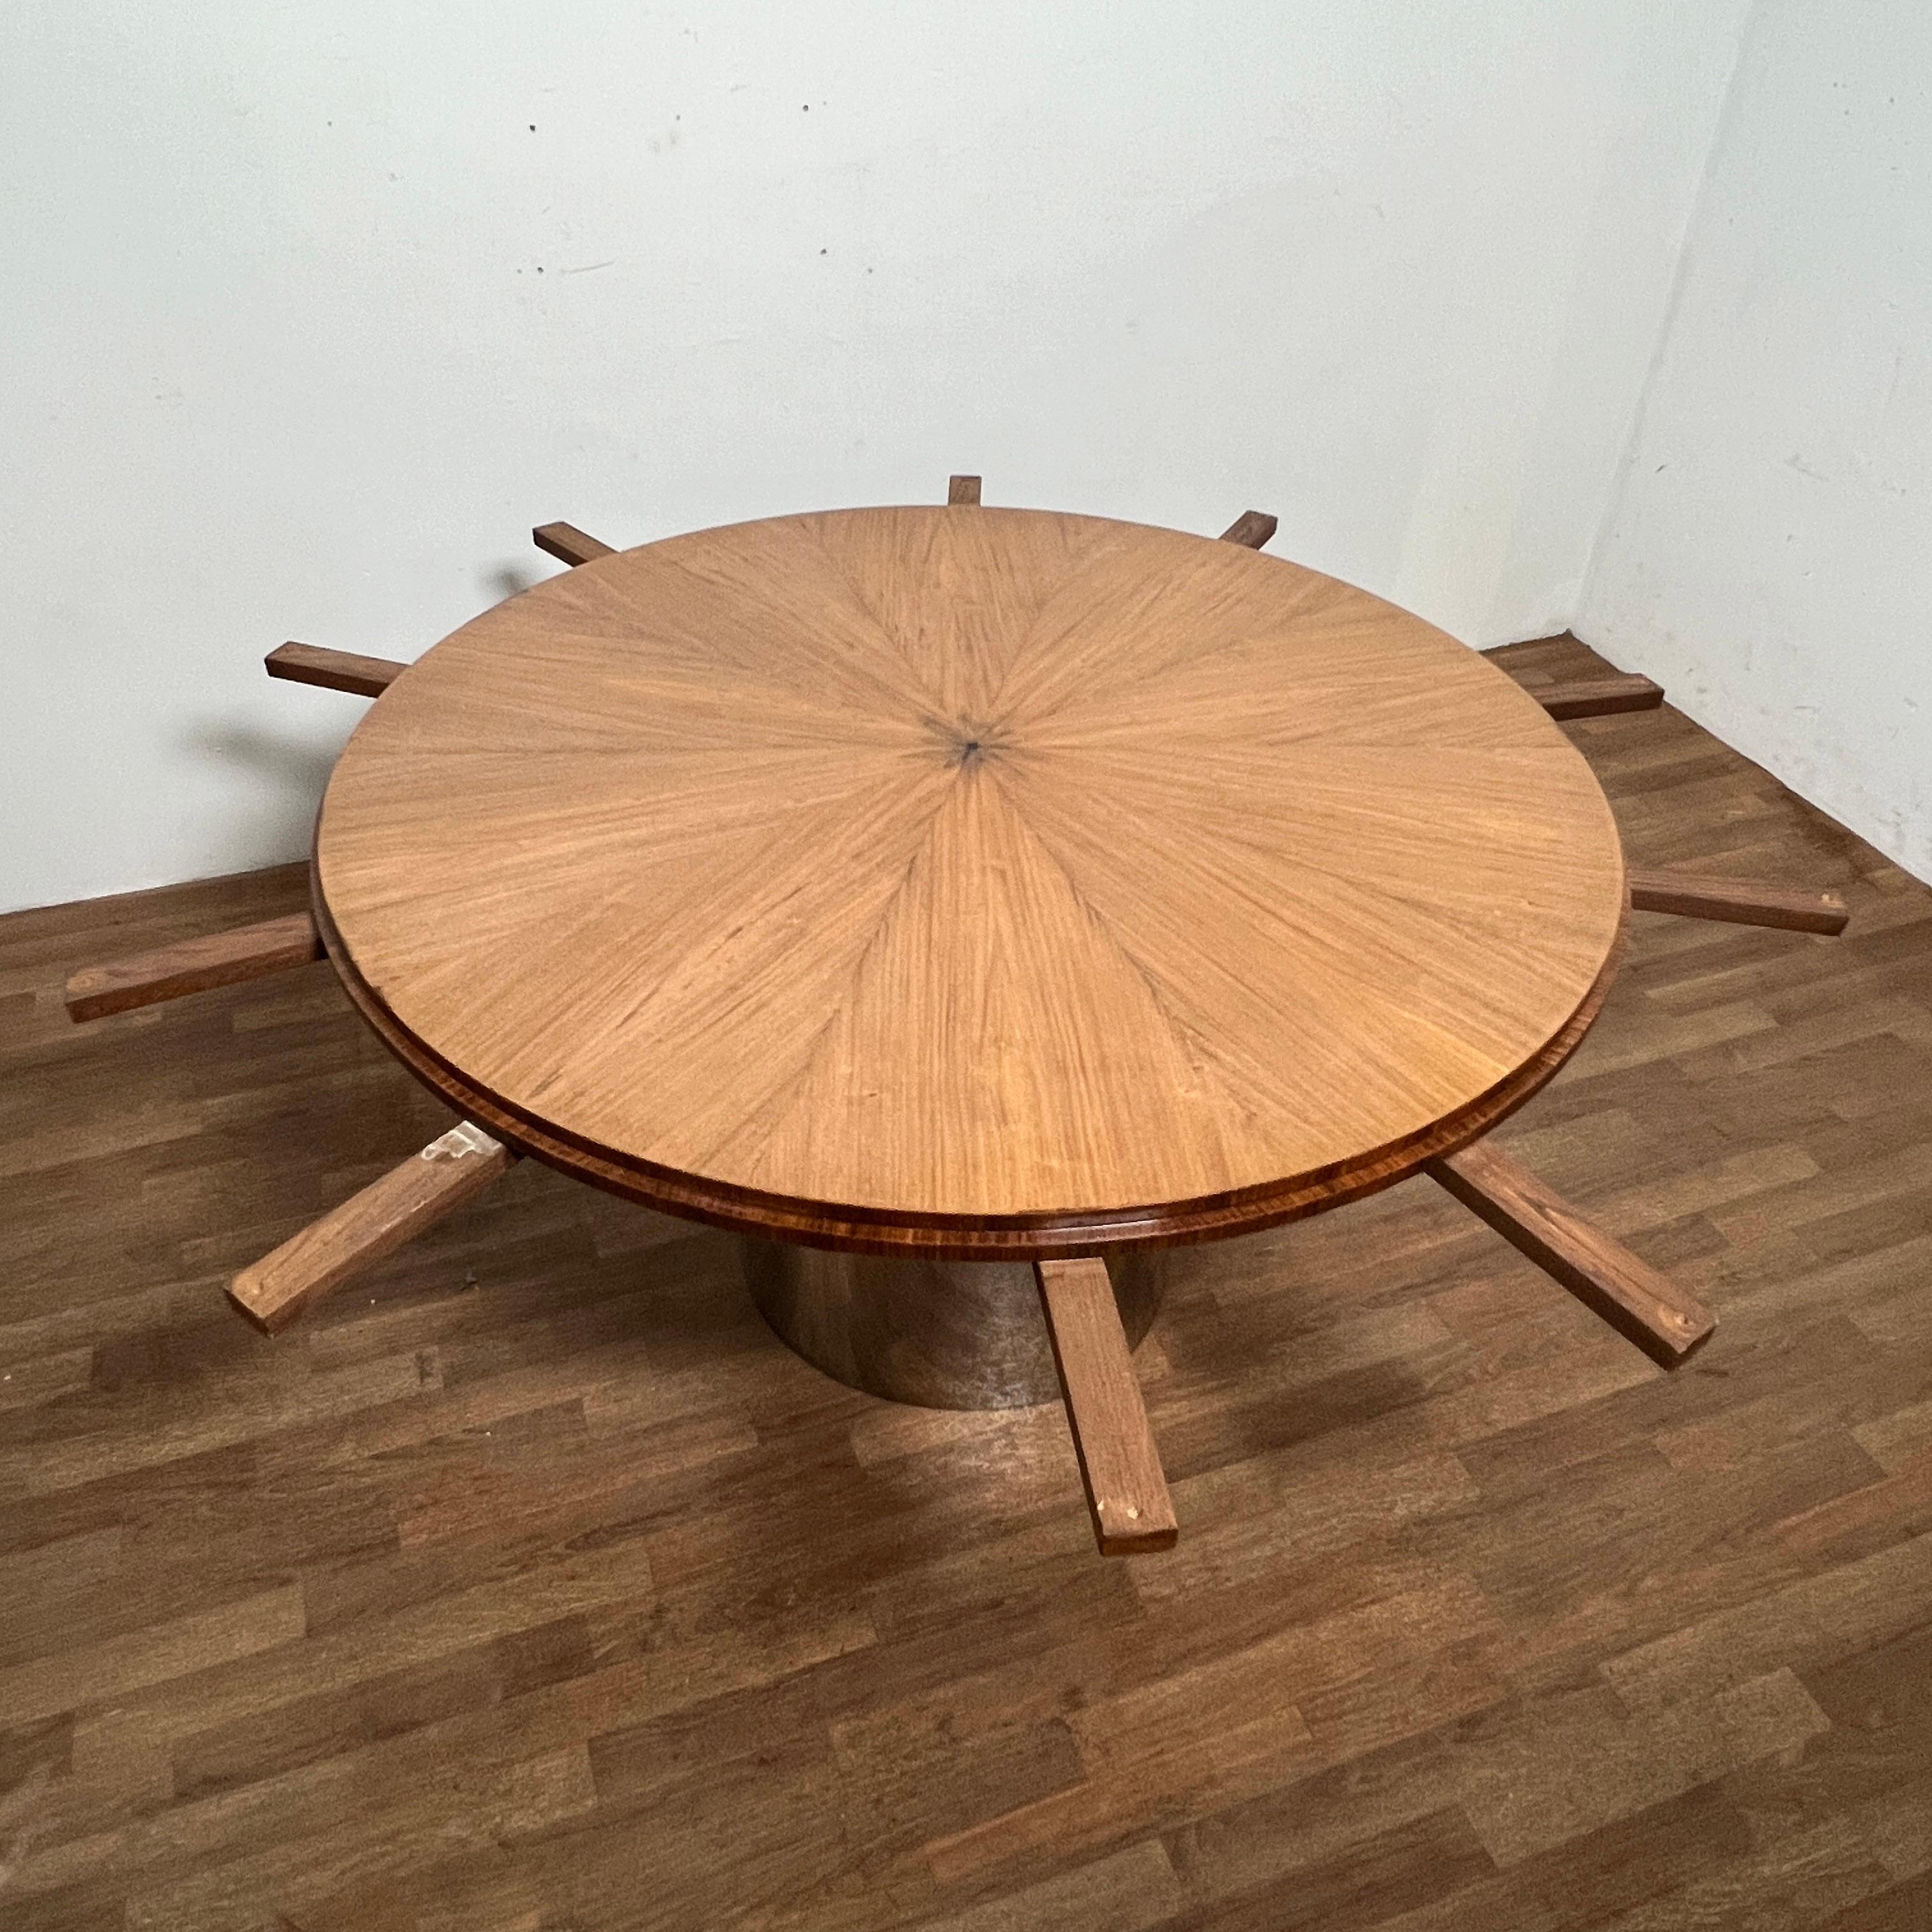 Late 20th Century Radial Mahogany Expandable Dining Table in Manner of Karl Springer, Ca. 1970s